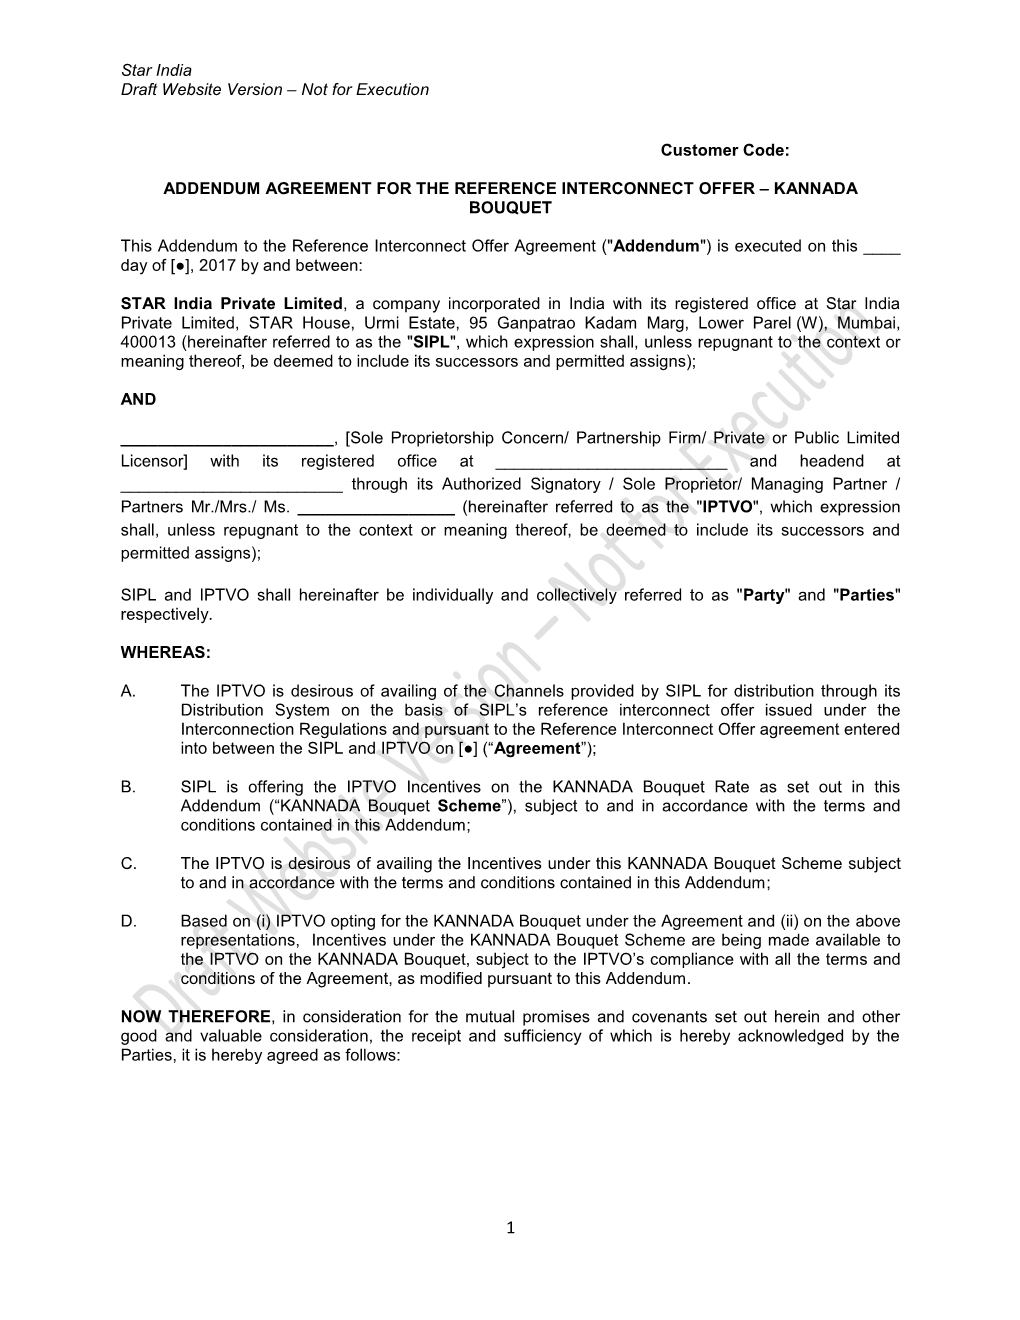 Addendum Agreement for the Reference Interconnect Offer – Kannada Bouquet